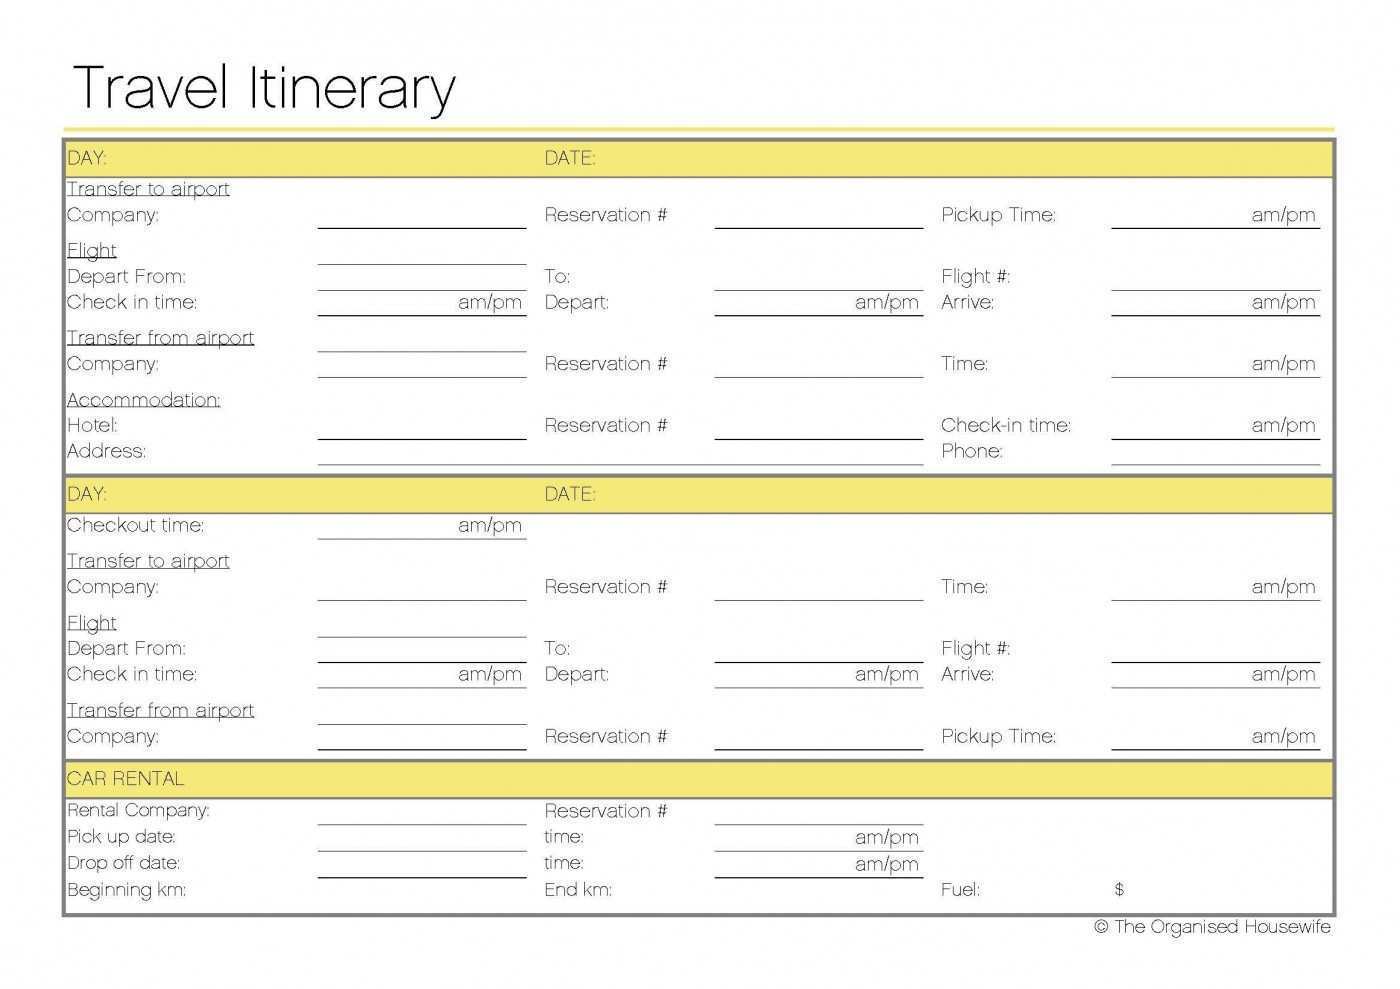 85 Visiting Travel Itinerary Template For Google Docs Now For Travel Itinerary Template For Google Docs Cards Design Templates